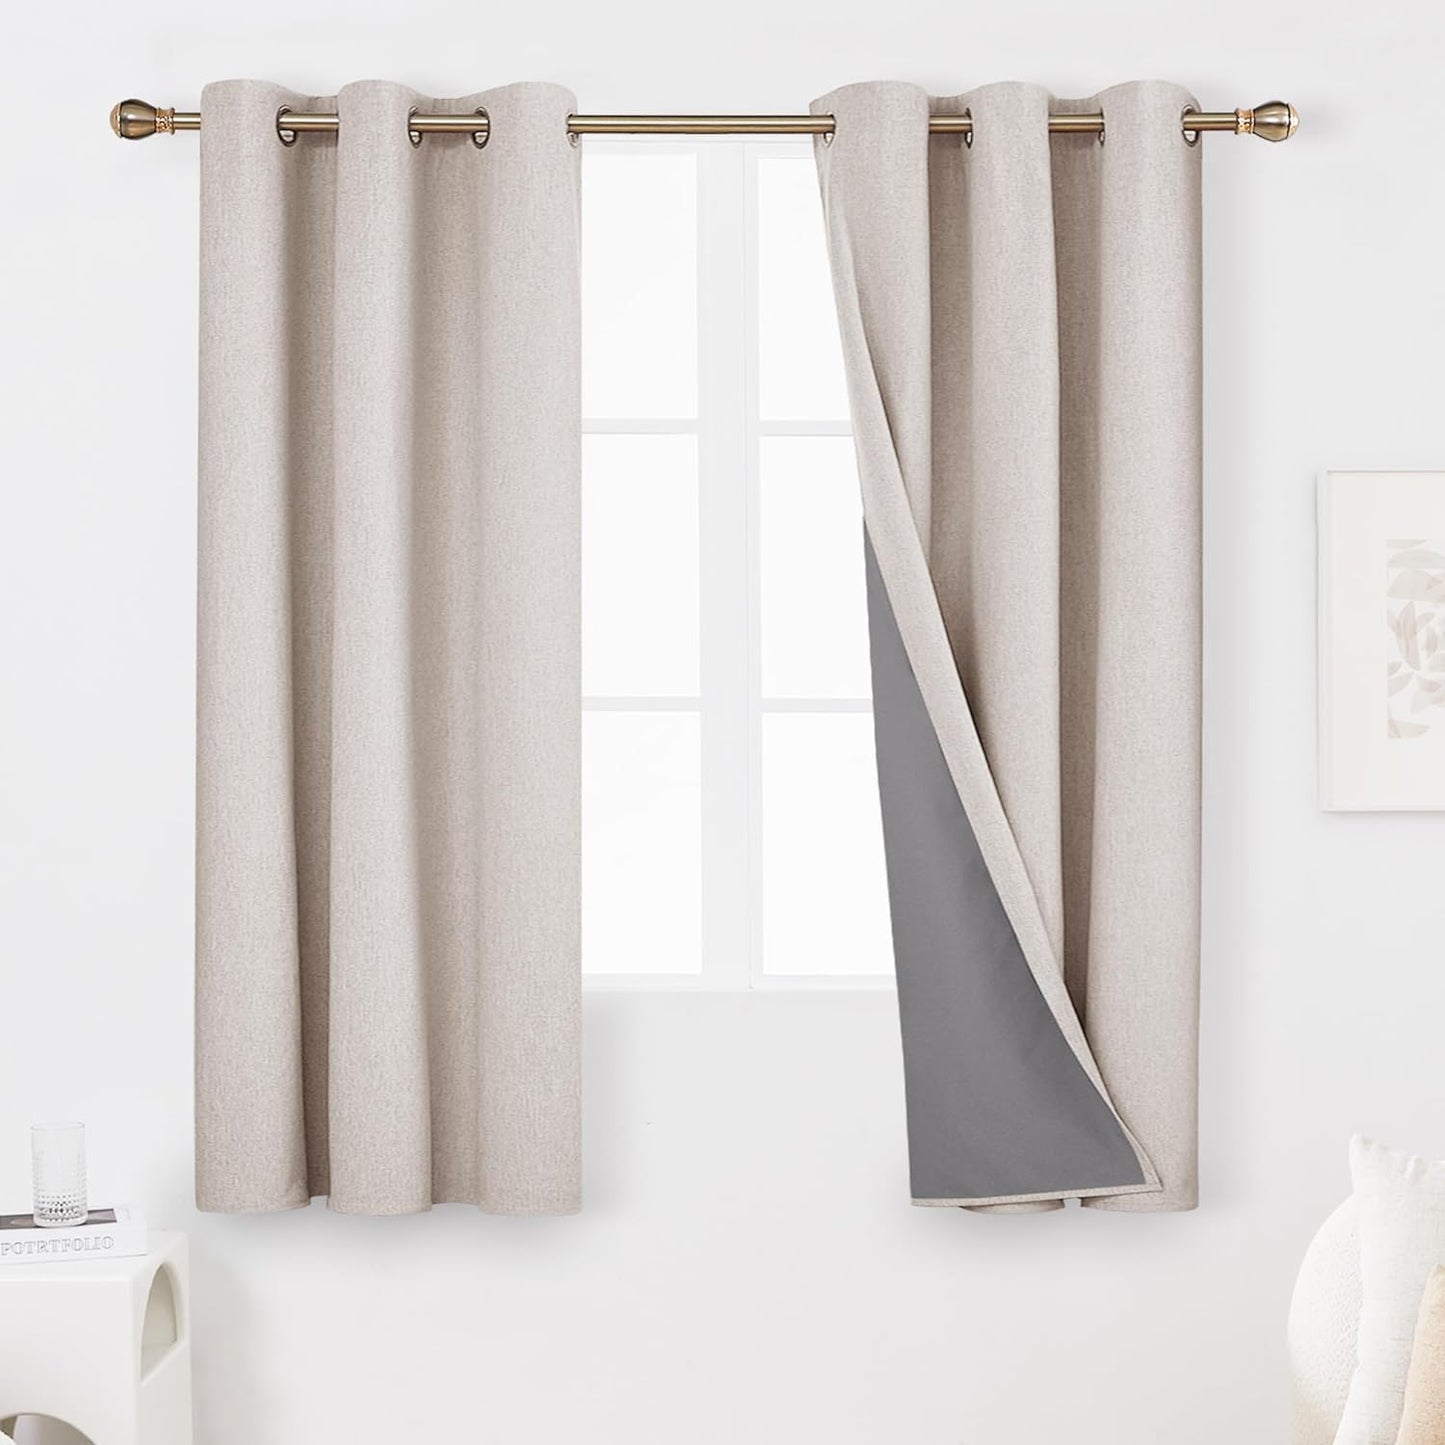 Deconovo Linen Blackout Curtains 84 Inch Length Set of 2, Thermal Curtain Drapes with Grey Coating, Total Light Blocking Waterproof Curtains for Indoor/Outdoor (Light Grey, 52W X 84L Inch)  Deconovo Flaxen 42X63 Inches 